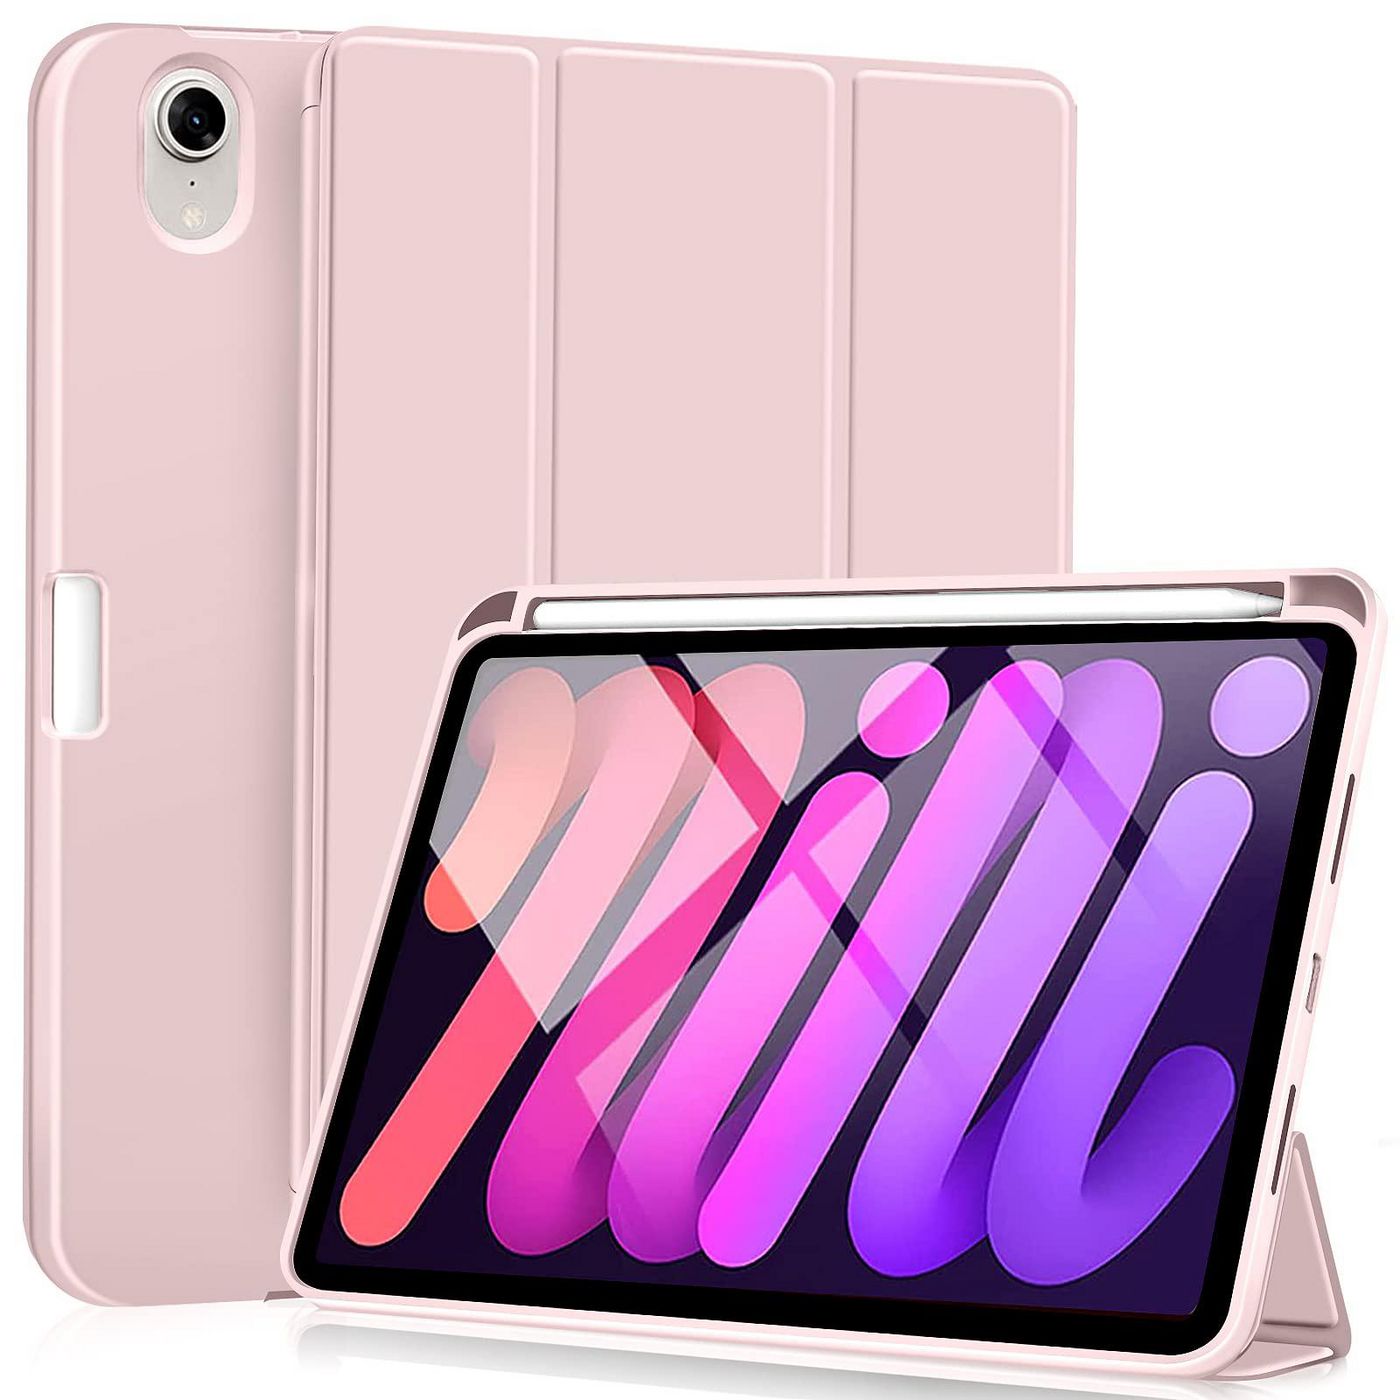 Miami Pencil Case - For iPad Mini 6. Pink Pu Leather Front With